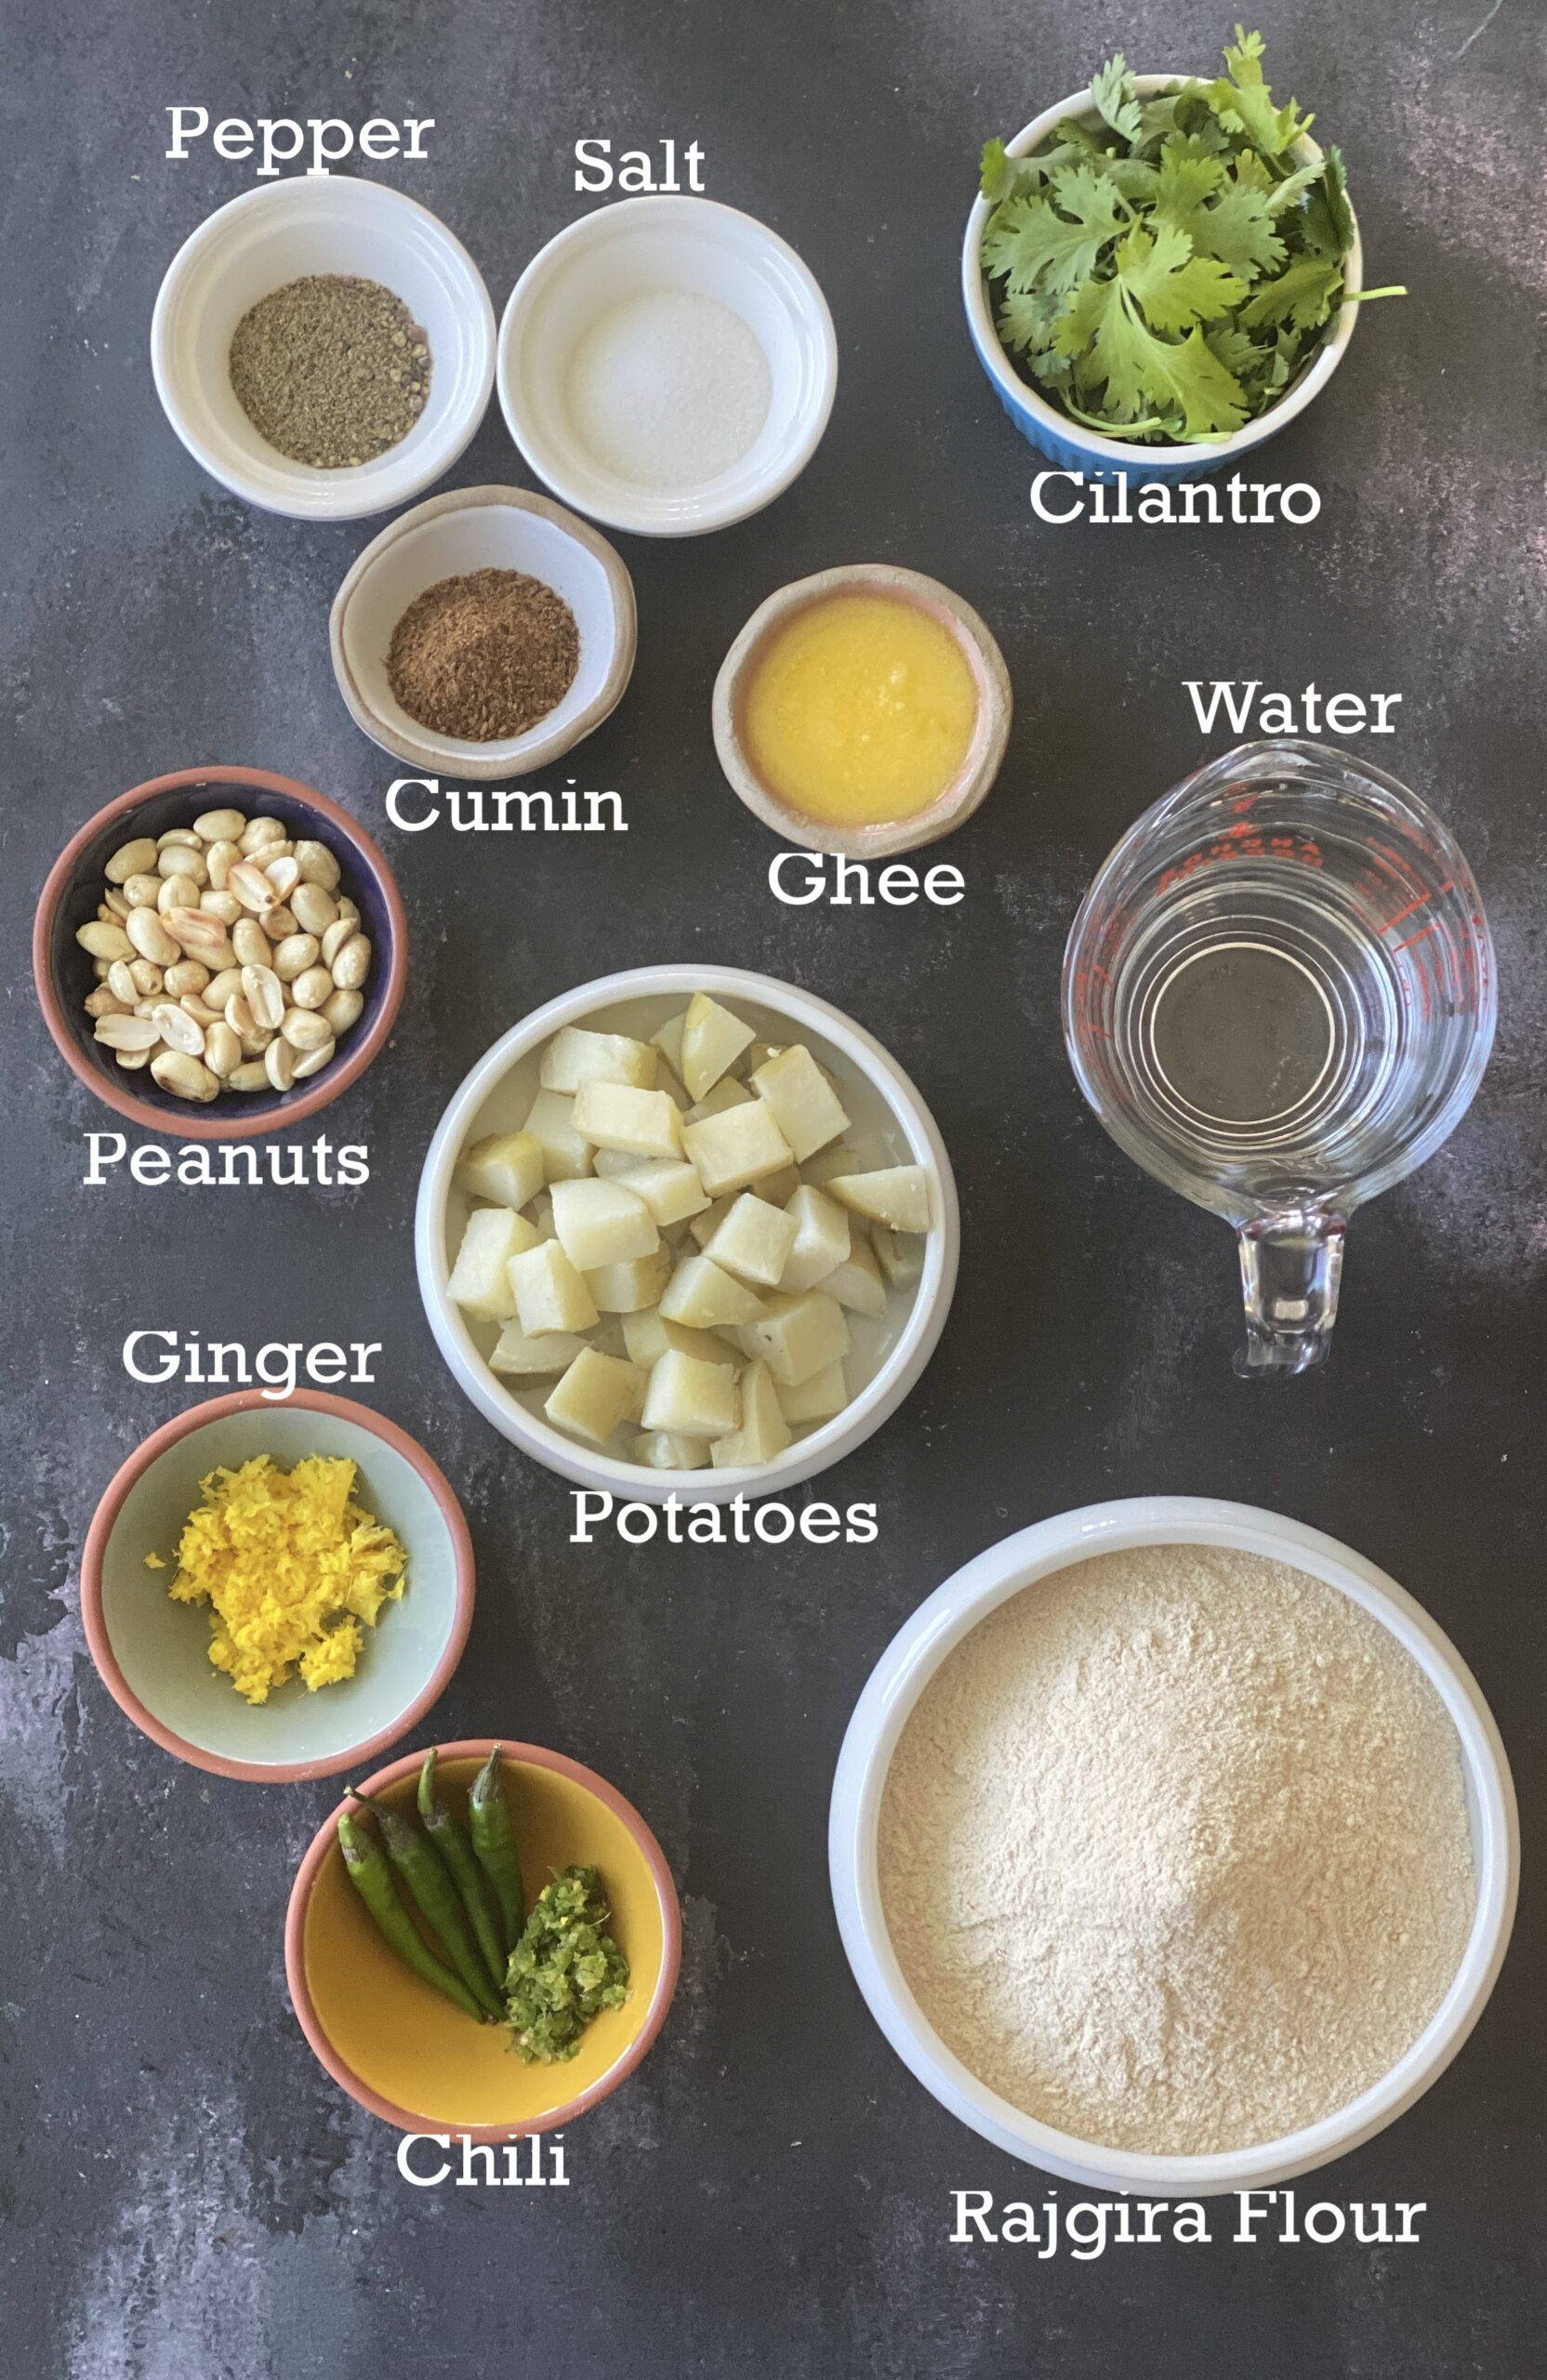 Ingredients for rajgira parathas; flour, potatoes, spices and oil all arranged in a black background. 